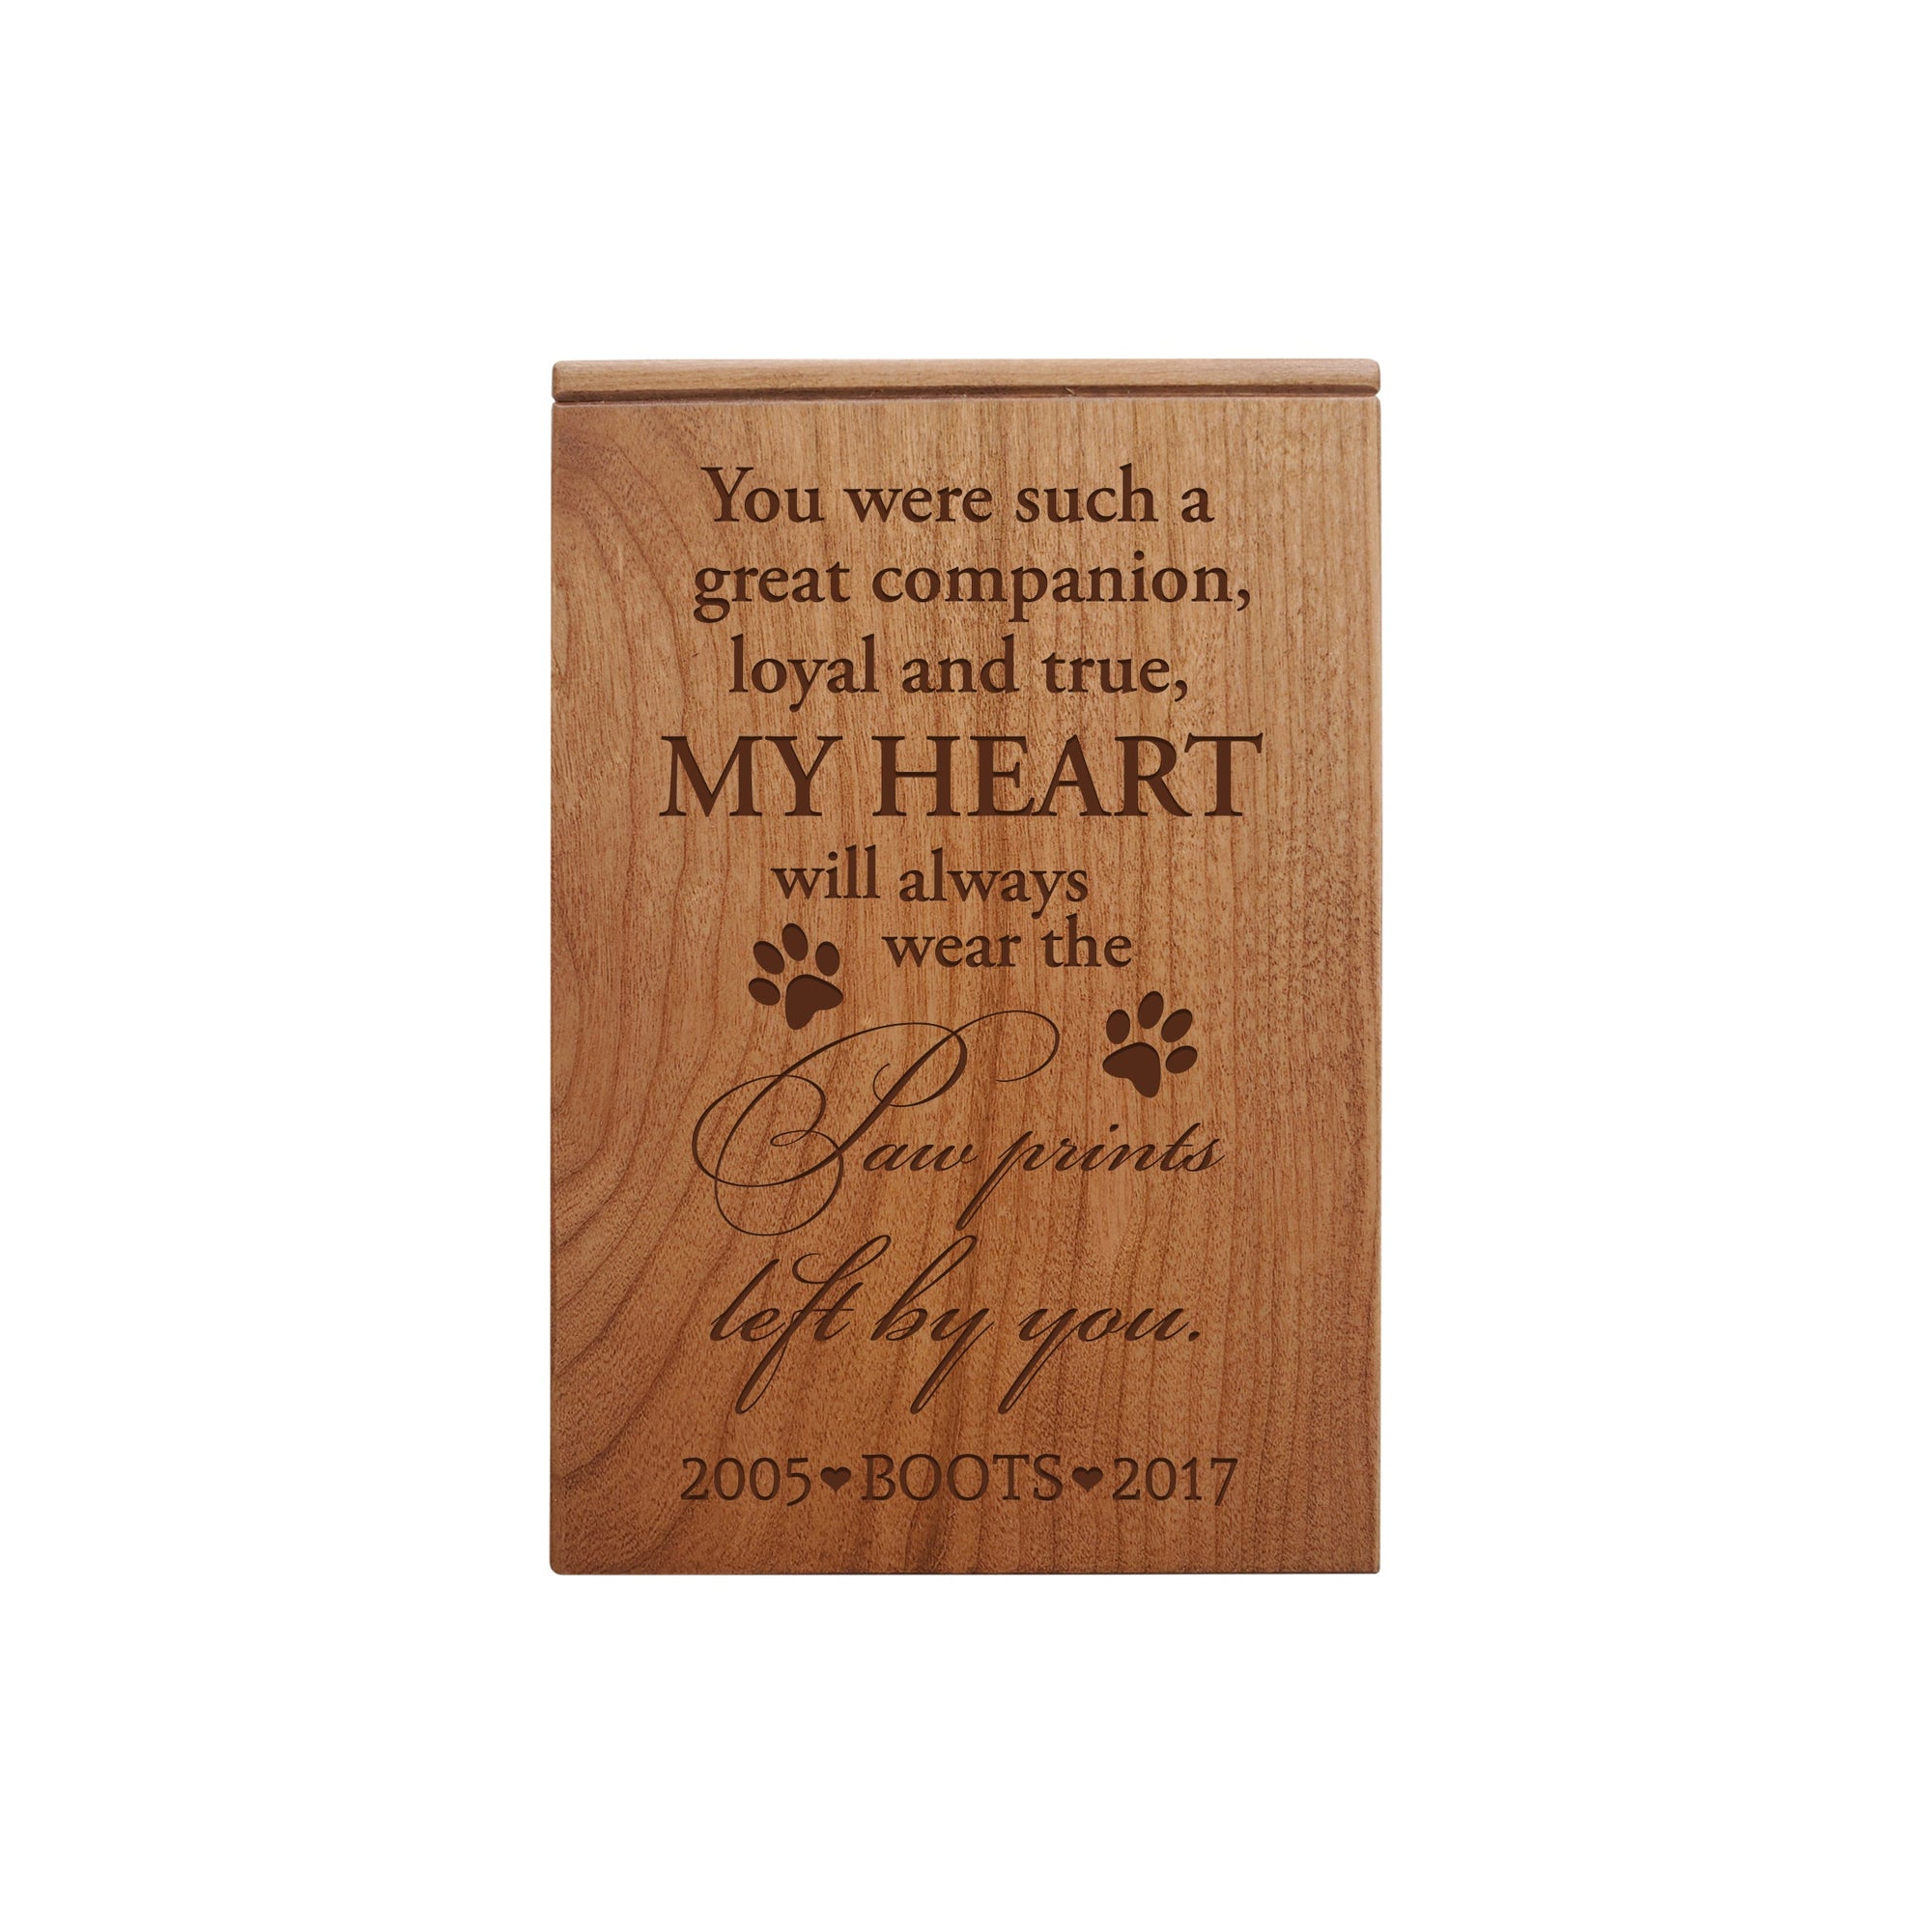 Pet Memorial Keepsake Cremation Urn Box For Dog or Cat - You Were Such A Great Companion